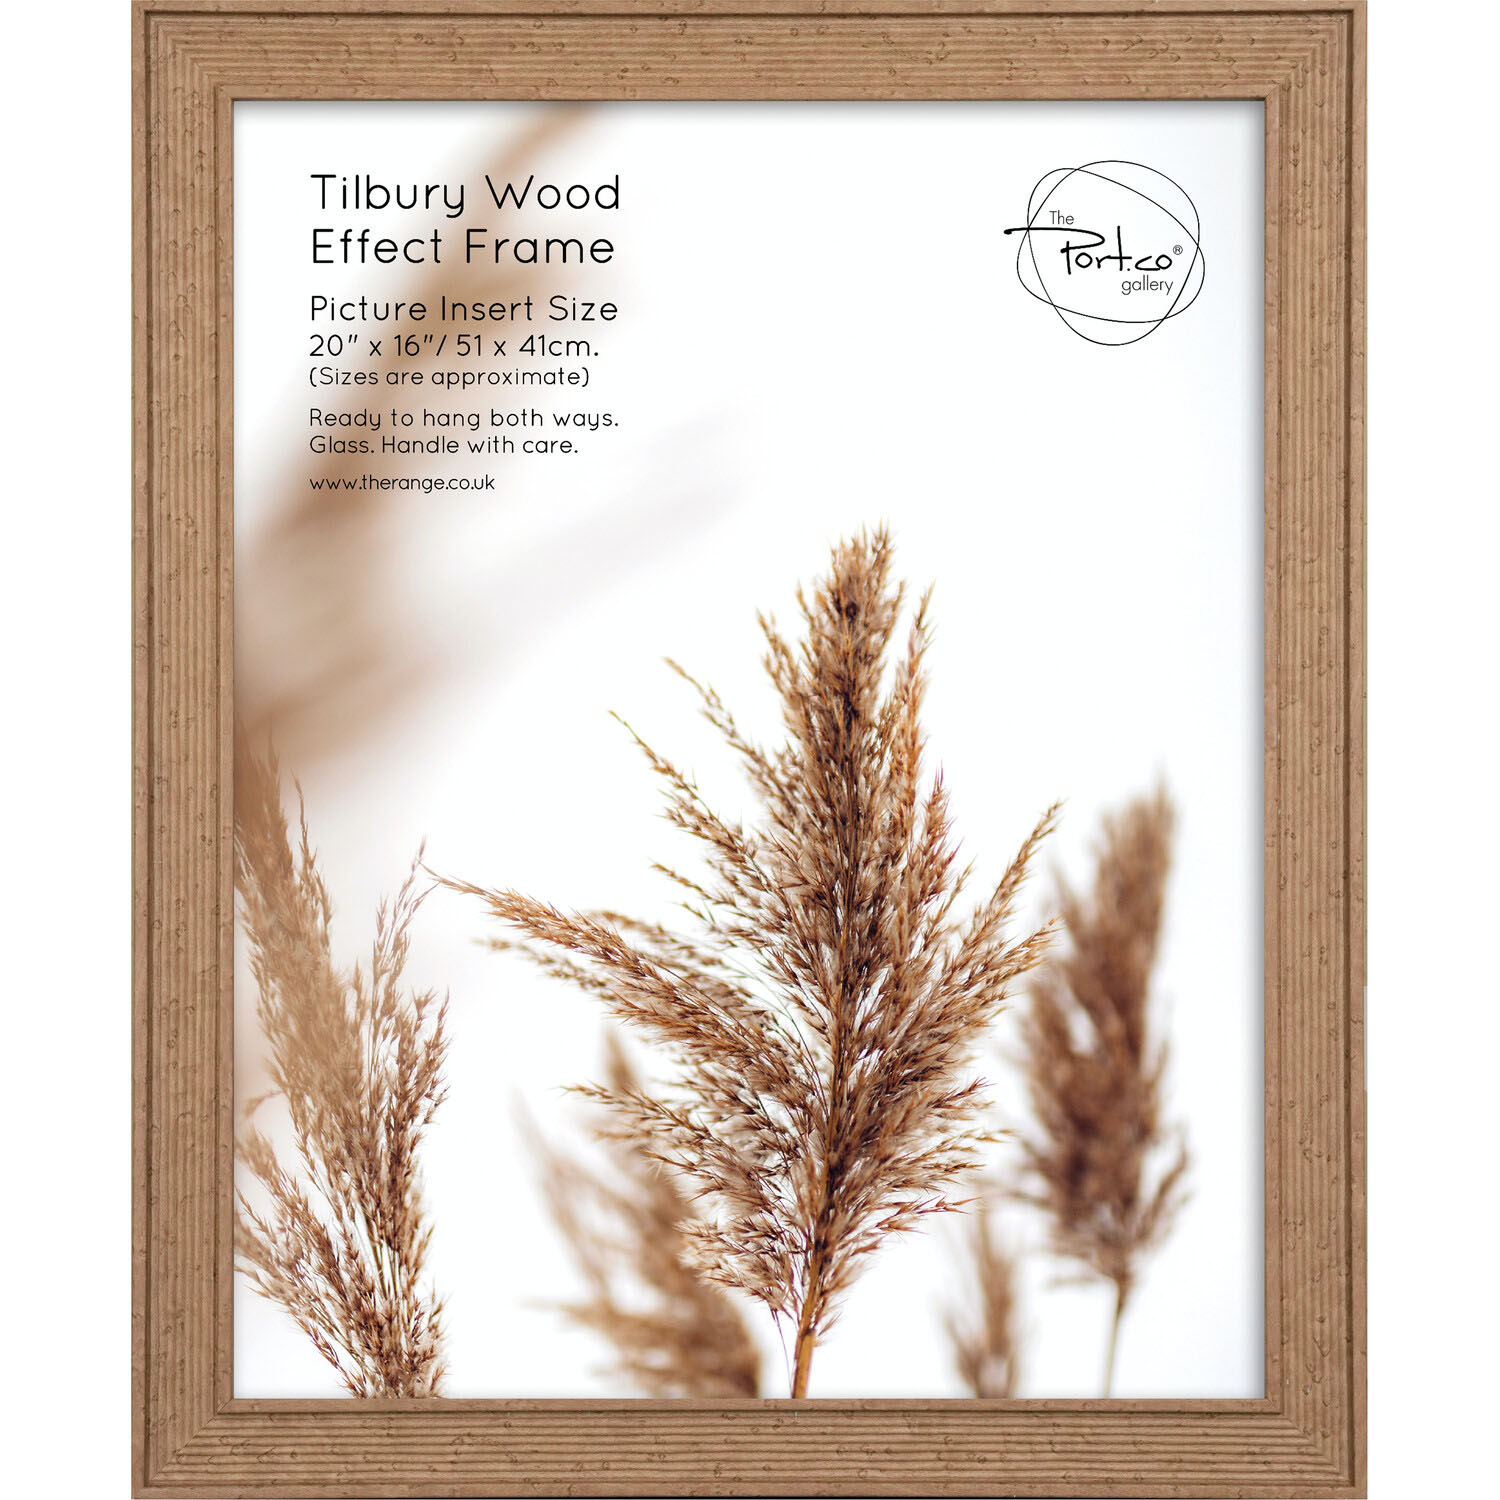 The Port. Co Gallery Tilbury Wood Effect Photo Frame 20 x 16 inch Image 1